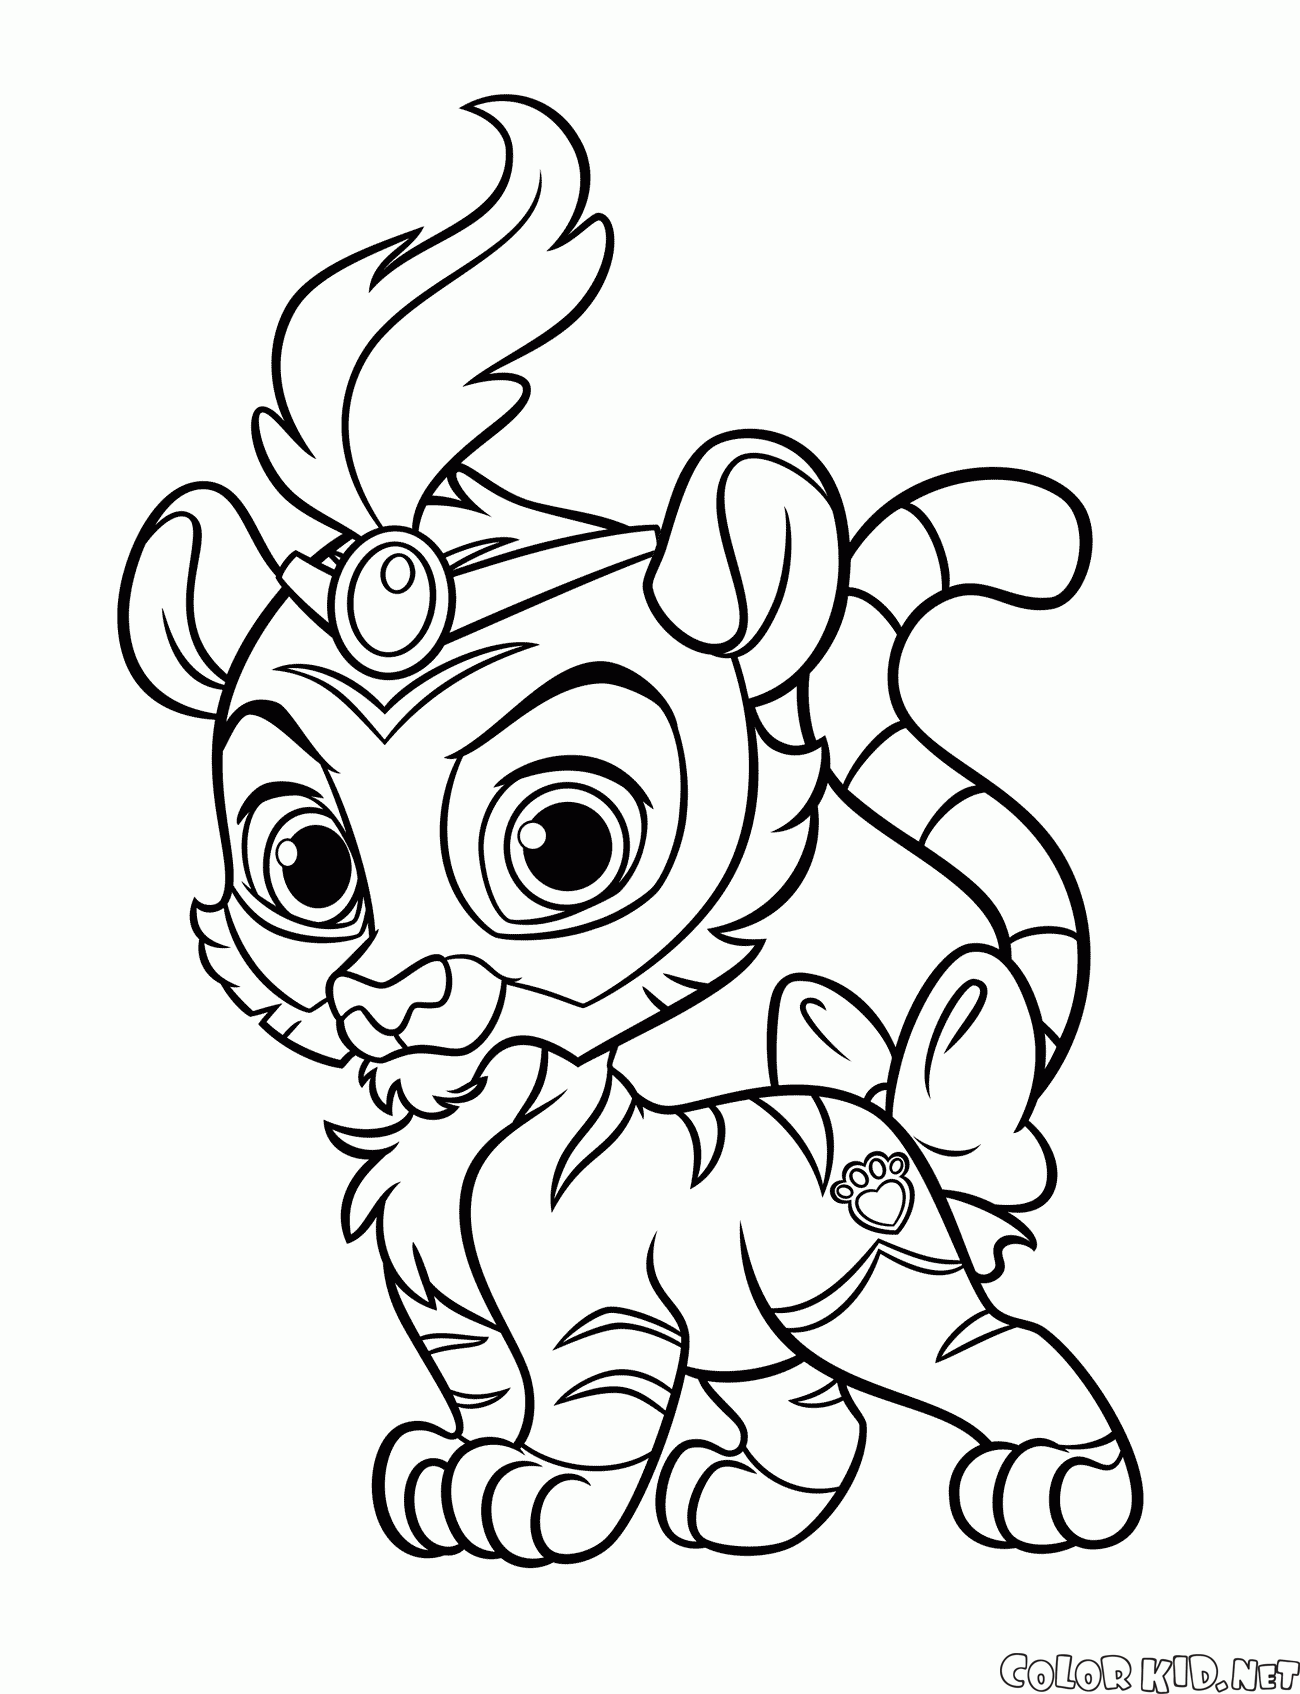 Coloring page - Fox Nuzzles